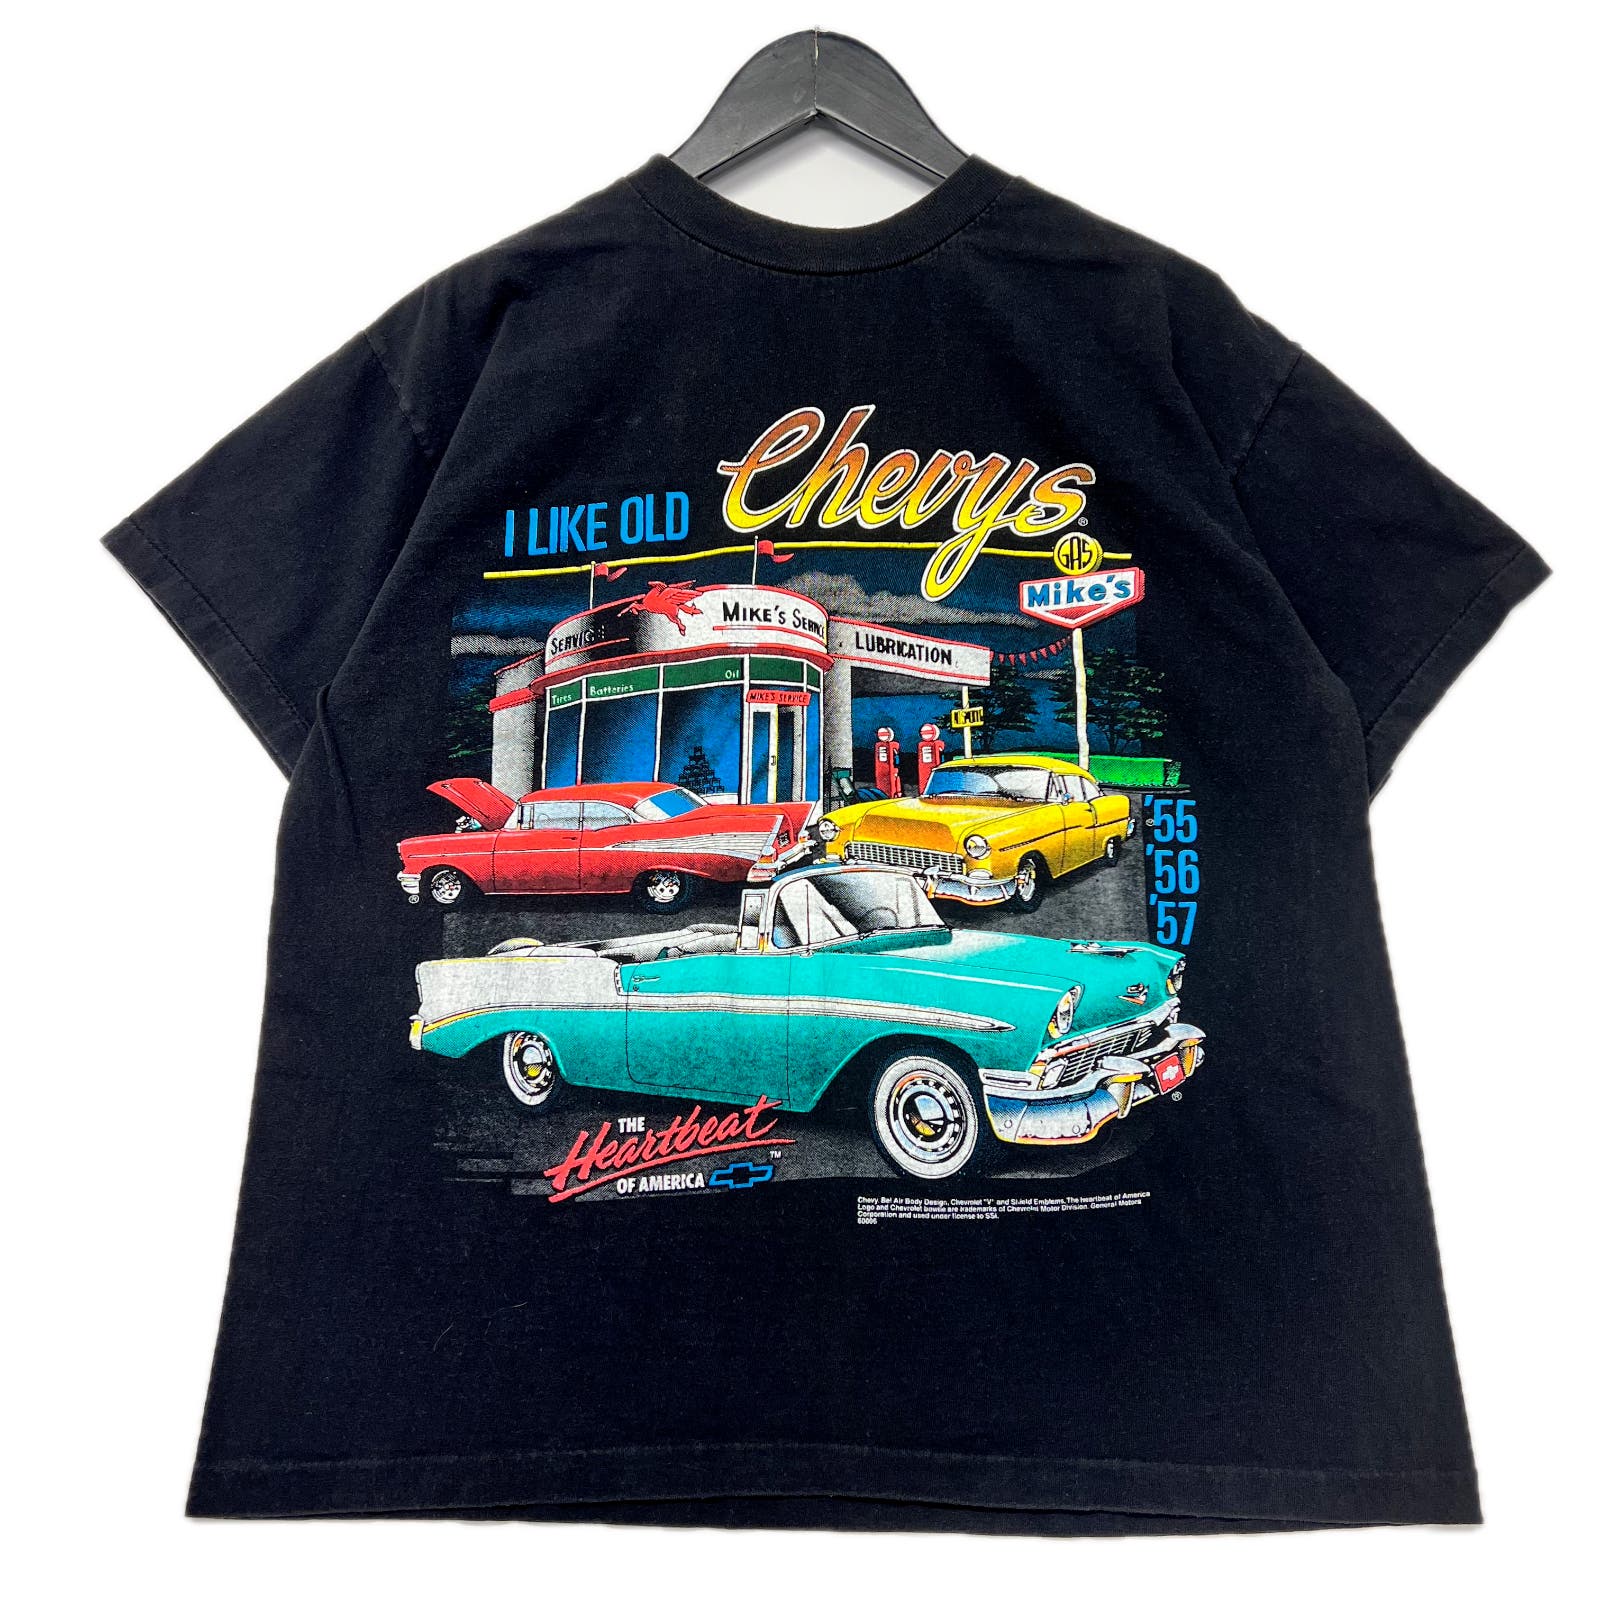 Vintage 90s Old Chevy Cars Graphic Black T-Shirt Size L Racing USA